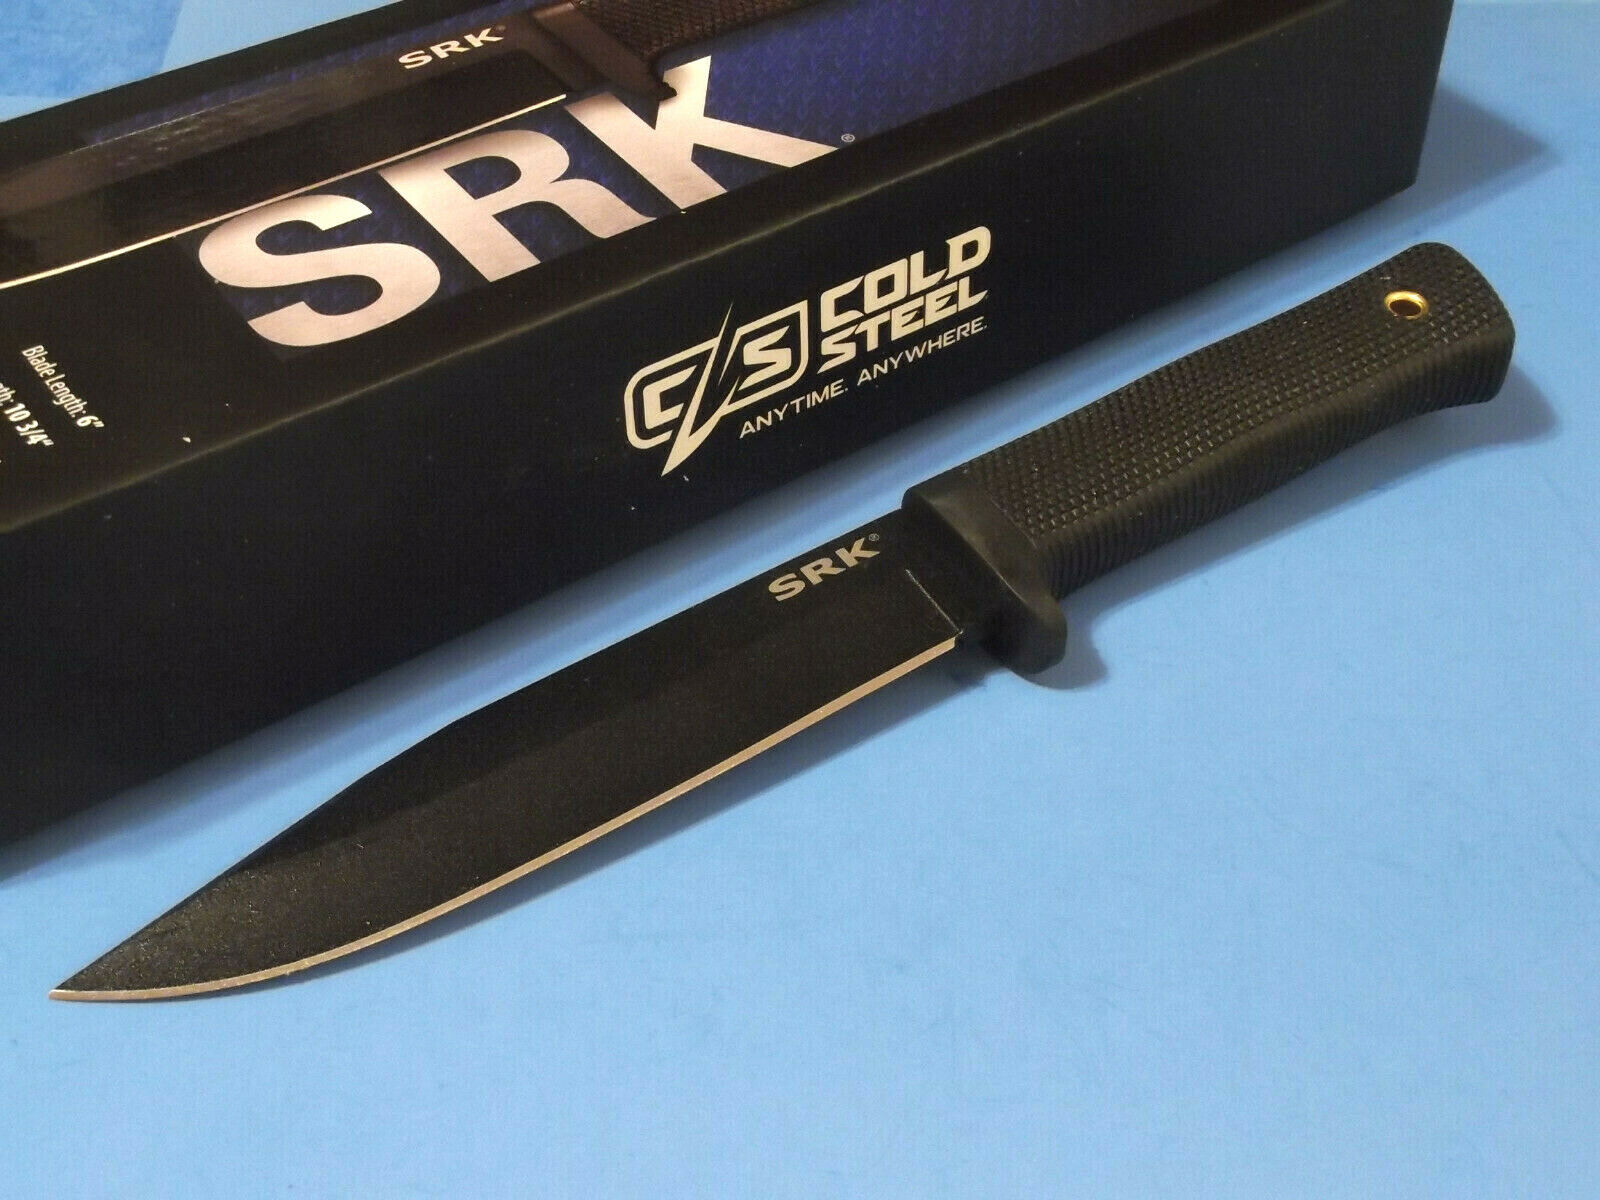 COLD STEEL 49LCK SRK Survival Rescue SK5 carbon fixed knife 10 3/4\